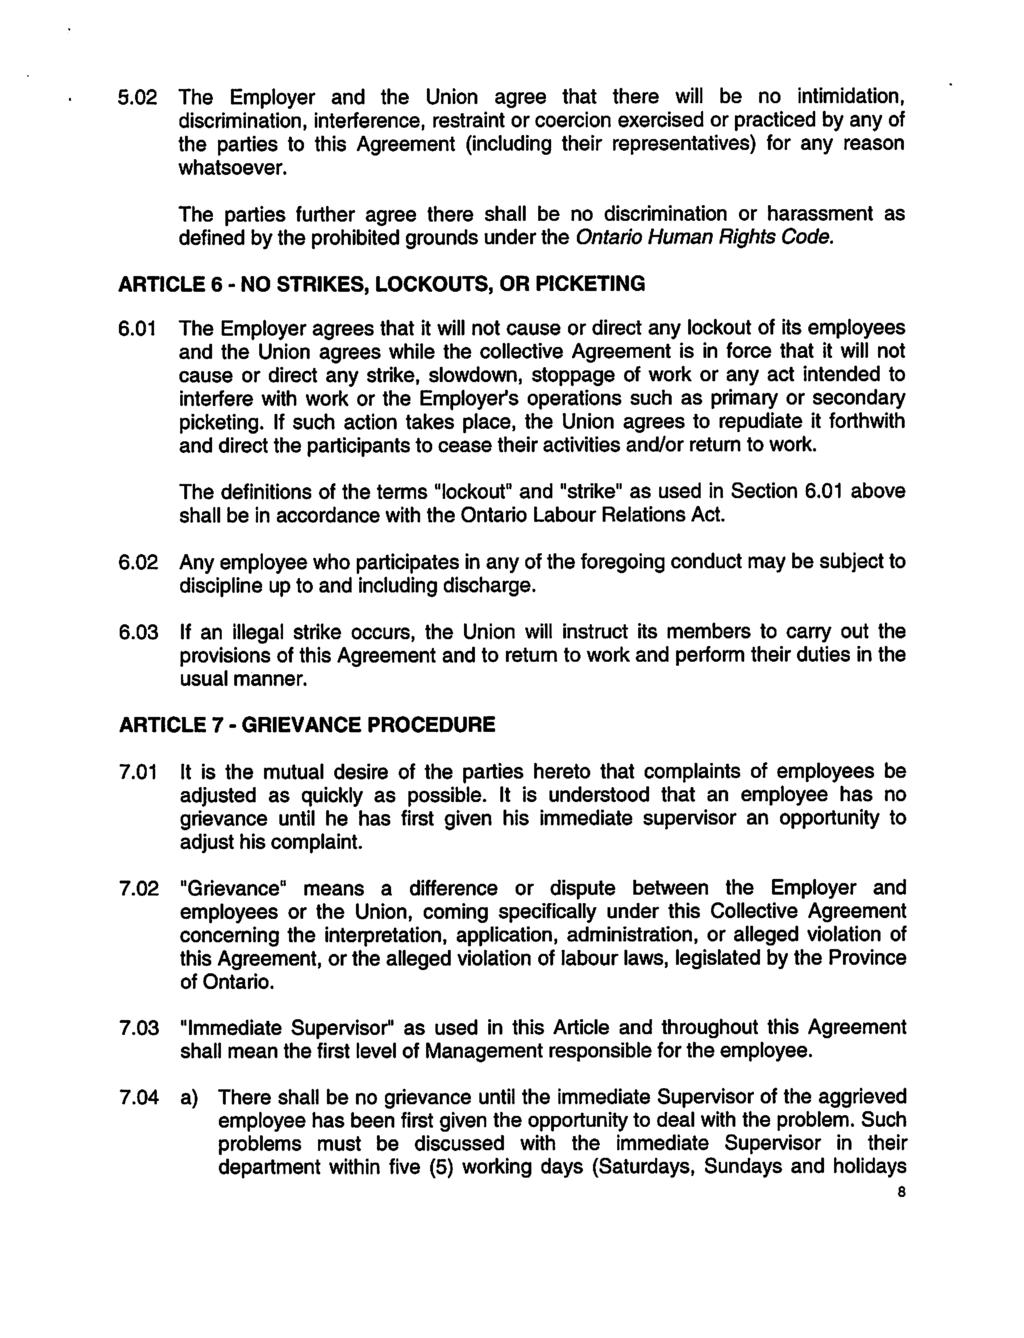 5.02 The Employer and the Union agree that there will be no intimidation, discrimination, interference, restraint or coercion exercised or practiced by any of the parties to this Agreement (including